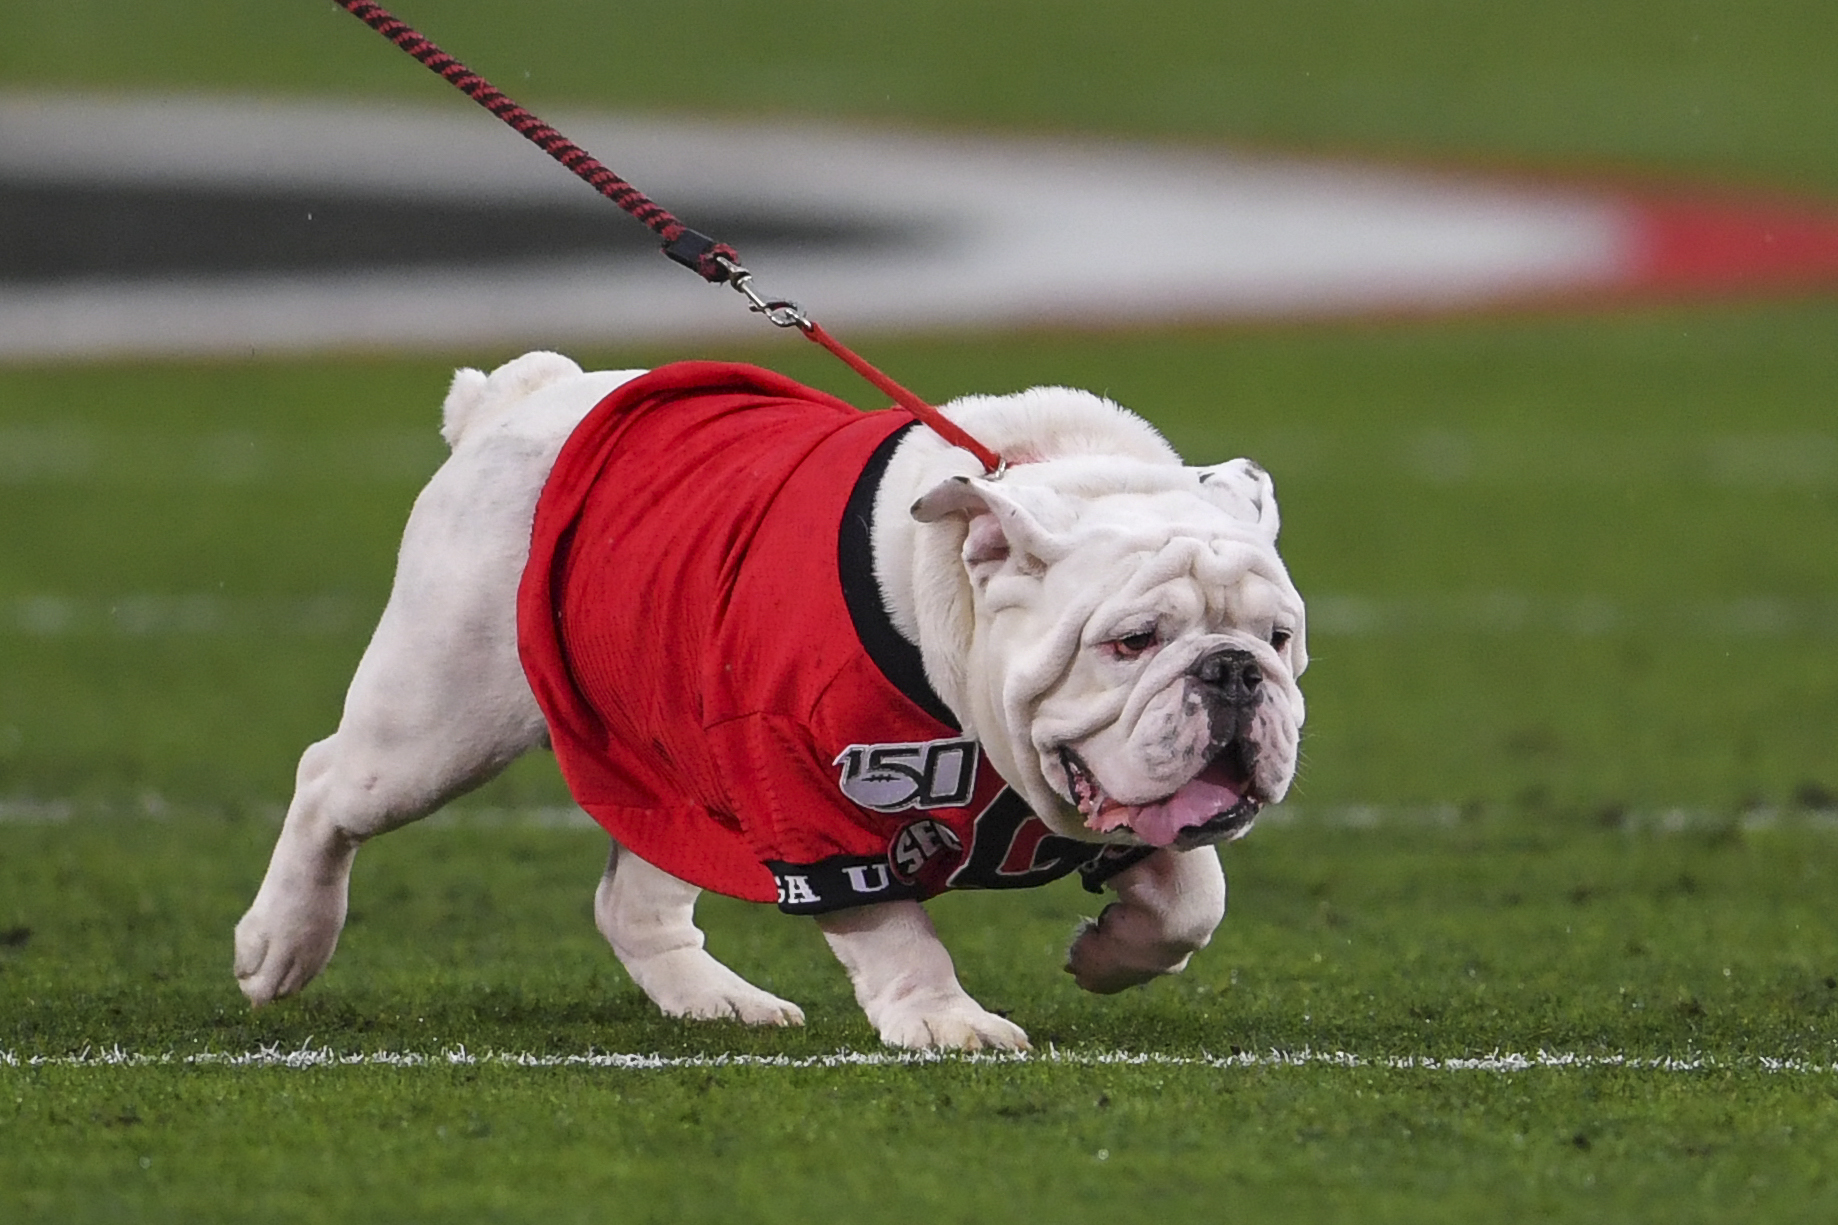 Olympics Postponed: Georgia Bulldogs Miss Out Due to COVID-19 Outbreak